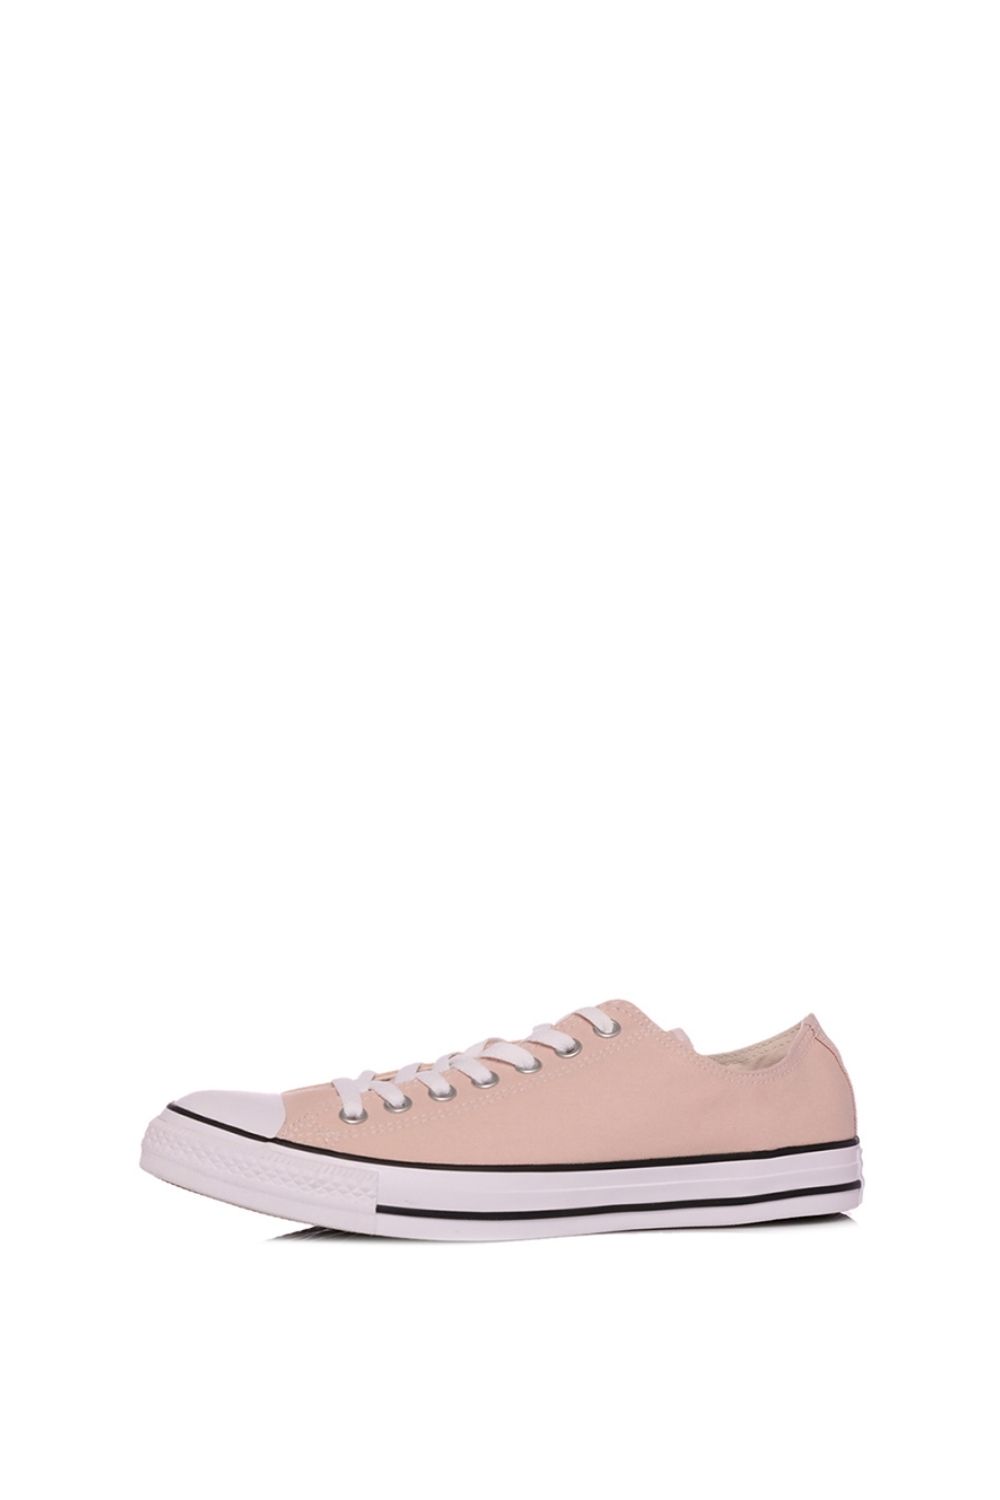 CONVERSE - Unisex sneakers CONVERSE Chuck Taylor All Star μπεζ Γυναικεία/Παπούτσια/Sneakers